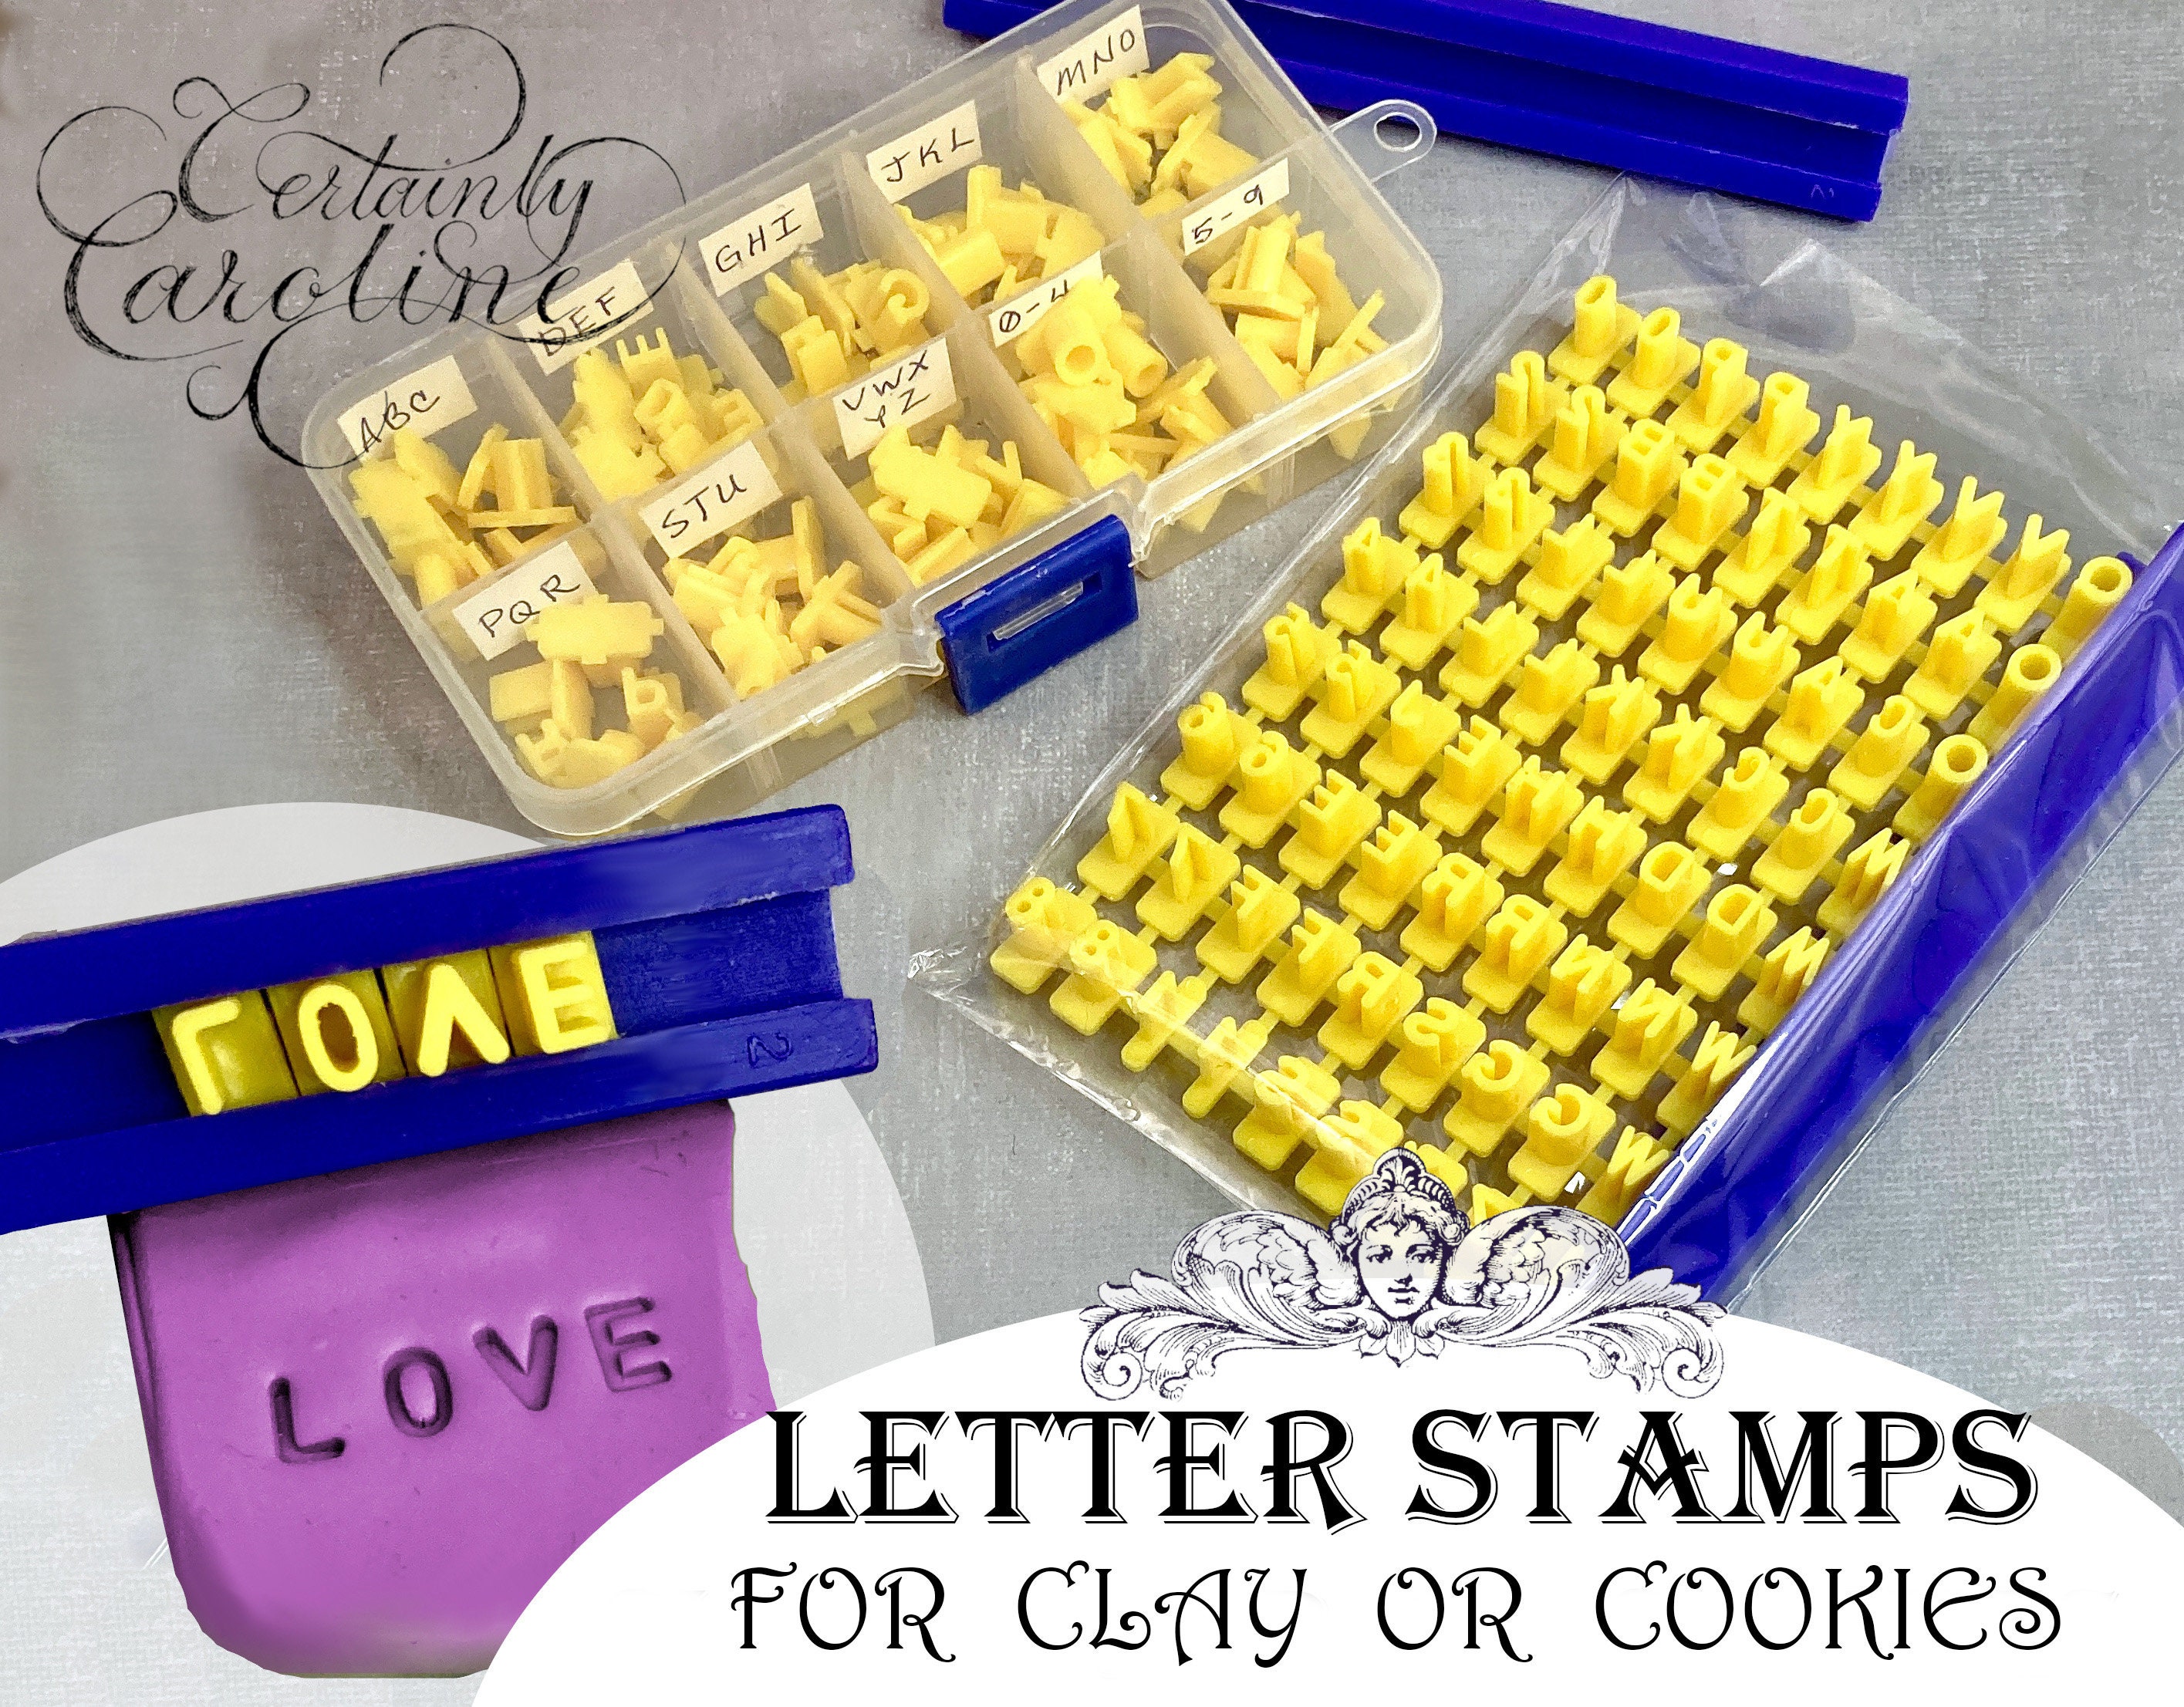 2 Sets of Polymer Clay Letter Stamps Mini Alphabet Number Letter Stamp DIY Craft Tool, Size: Small